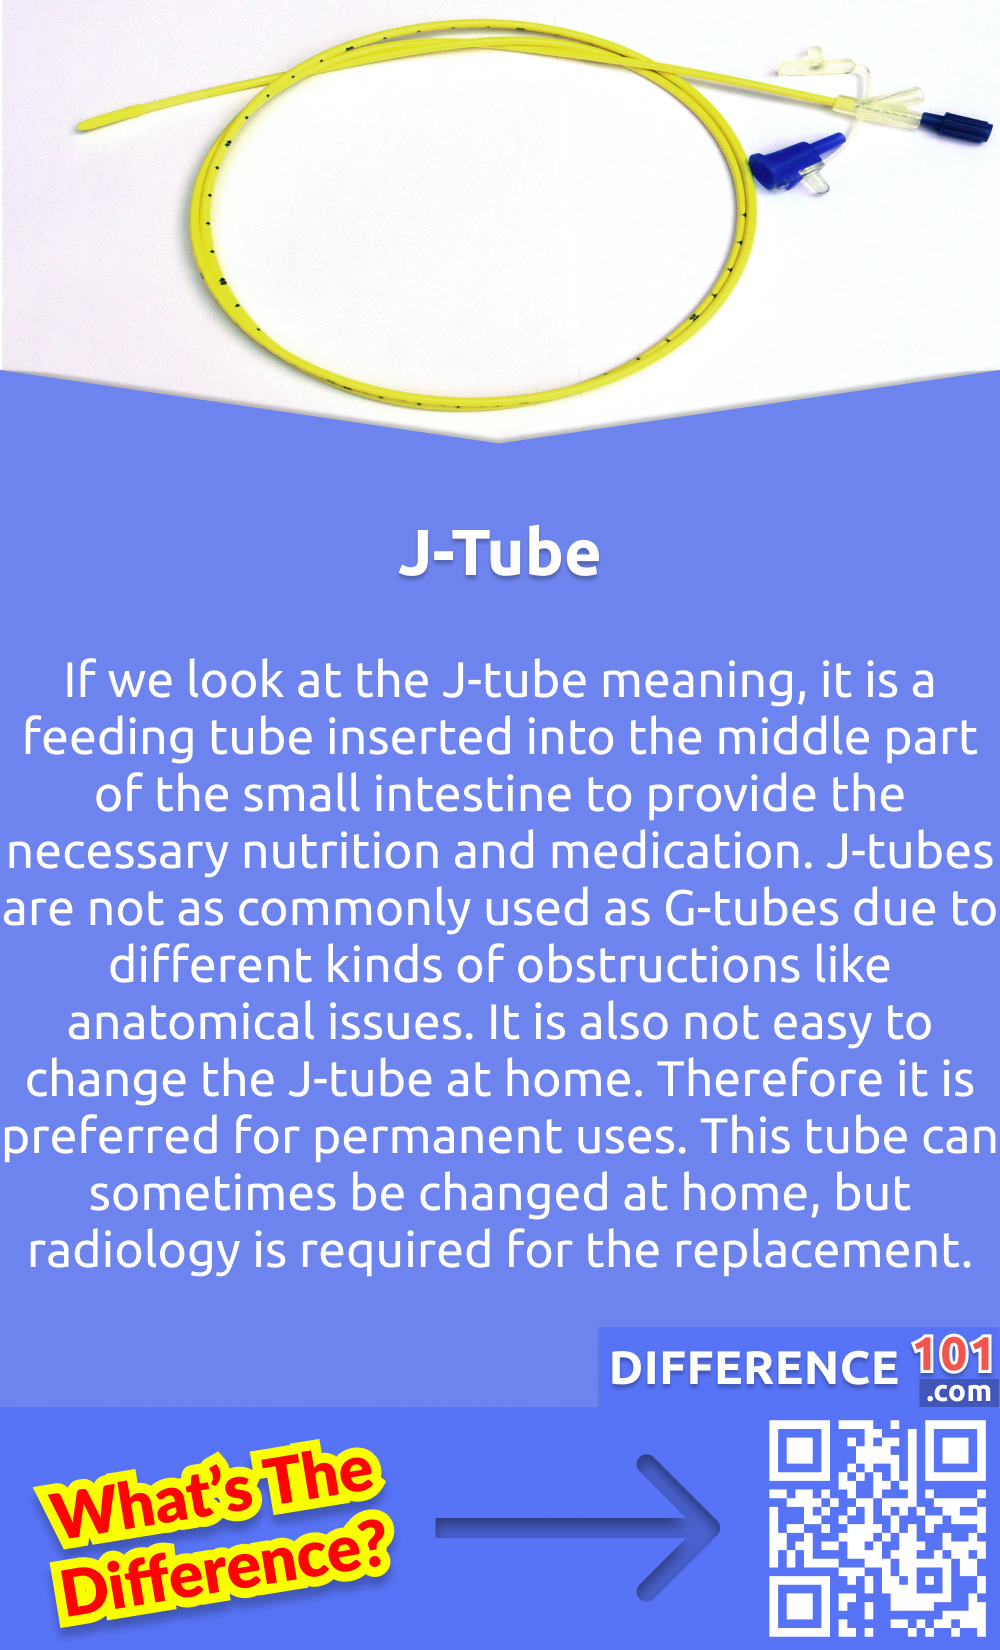 What Is J-Tube? If we look at the J-tube meaning, it is a feeding tube inserted into the middle part of the small intestine to provide the necessary nutrition and medication. J-tubes are not as commonly used as G-tubes due to different kinds of obstructions like anatomical issues. It is also not easy to change the J-tube at home. Therefore it is preferred for permanent uses. This tube can sometimes be changed at home, but radiology is required for the replacement. There are various methods through which a J-tube can be inserted into the small intestine. Some common procedures include open surgery, gastric bypass, and percutaneous endoscopic jejunostomy. J-tubes are used for patients with chronic vomiting, high risk of respiration, and low gastric motility. J-tubes are also inserted in patients where G-tubes can not work. But a J-tube can cause more problems than a G-tube, like irritation and granulation of tissues.
